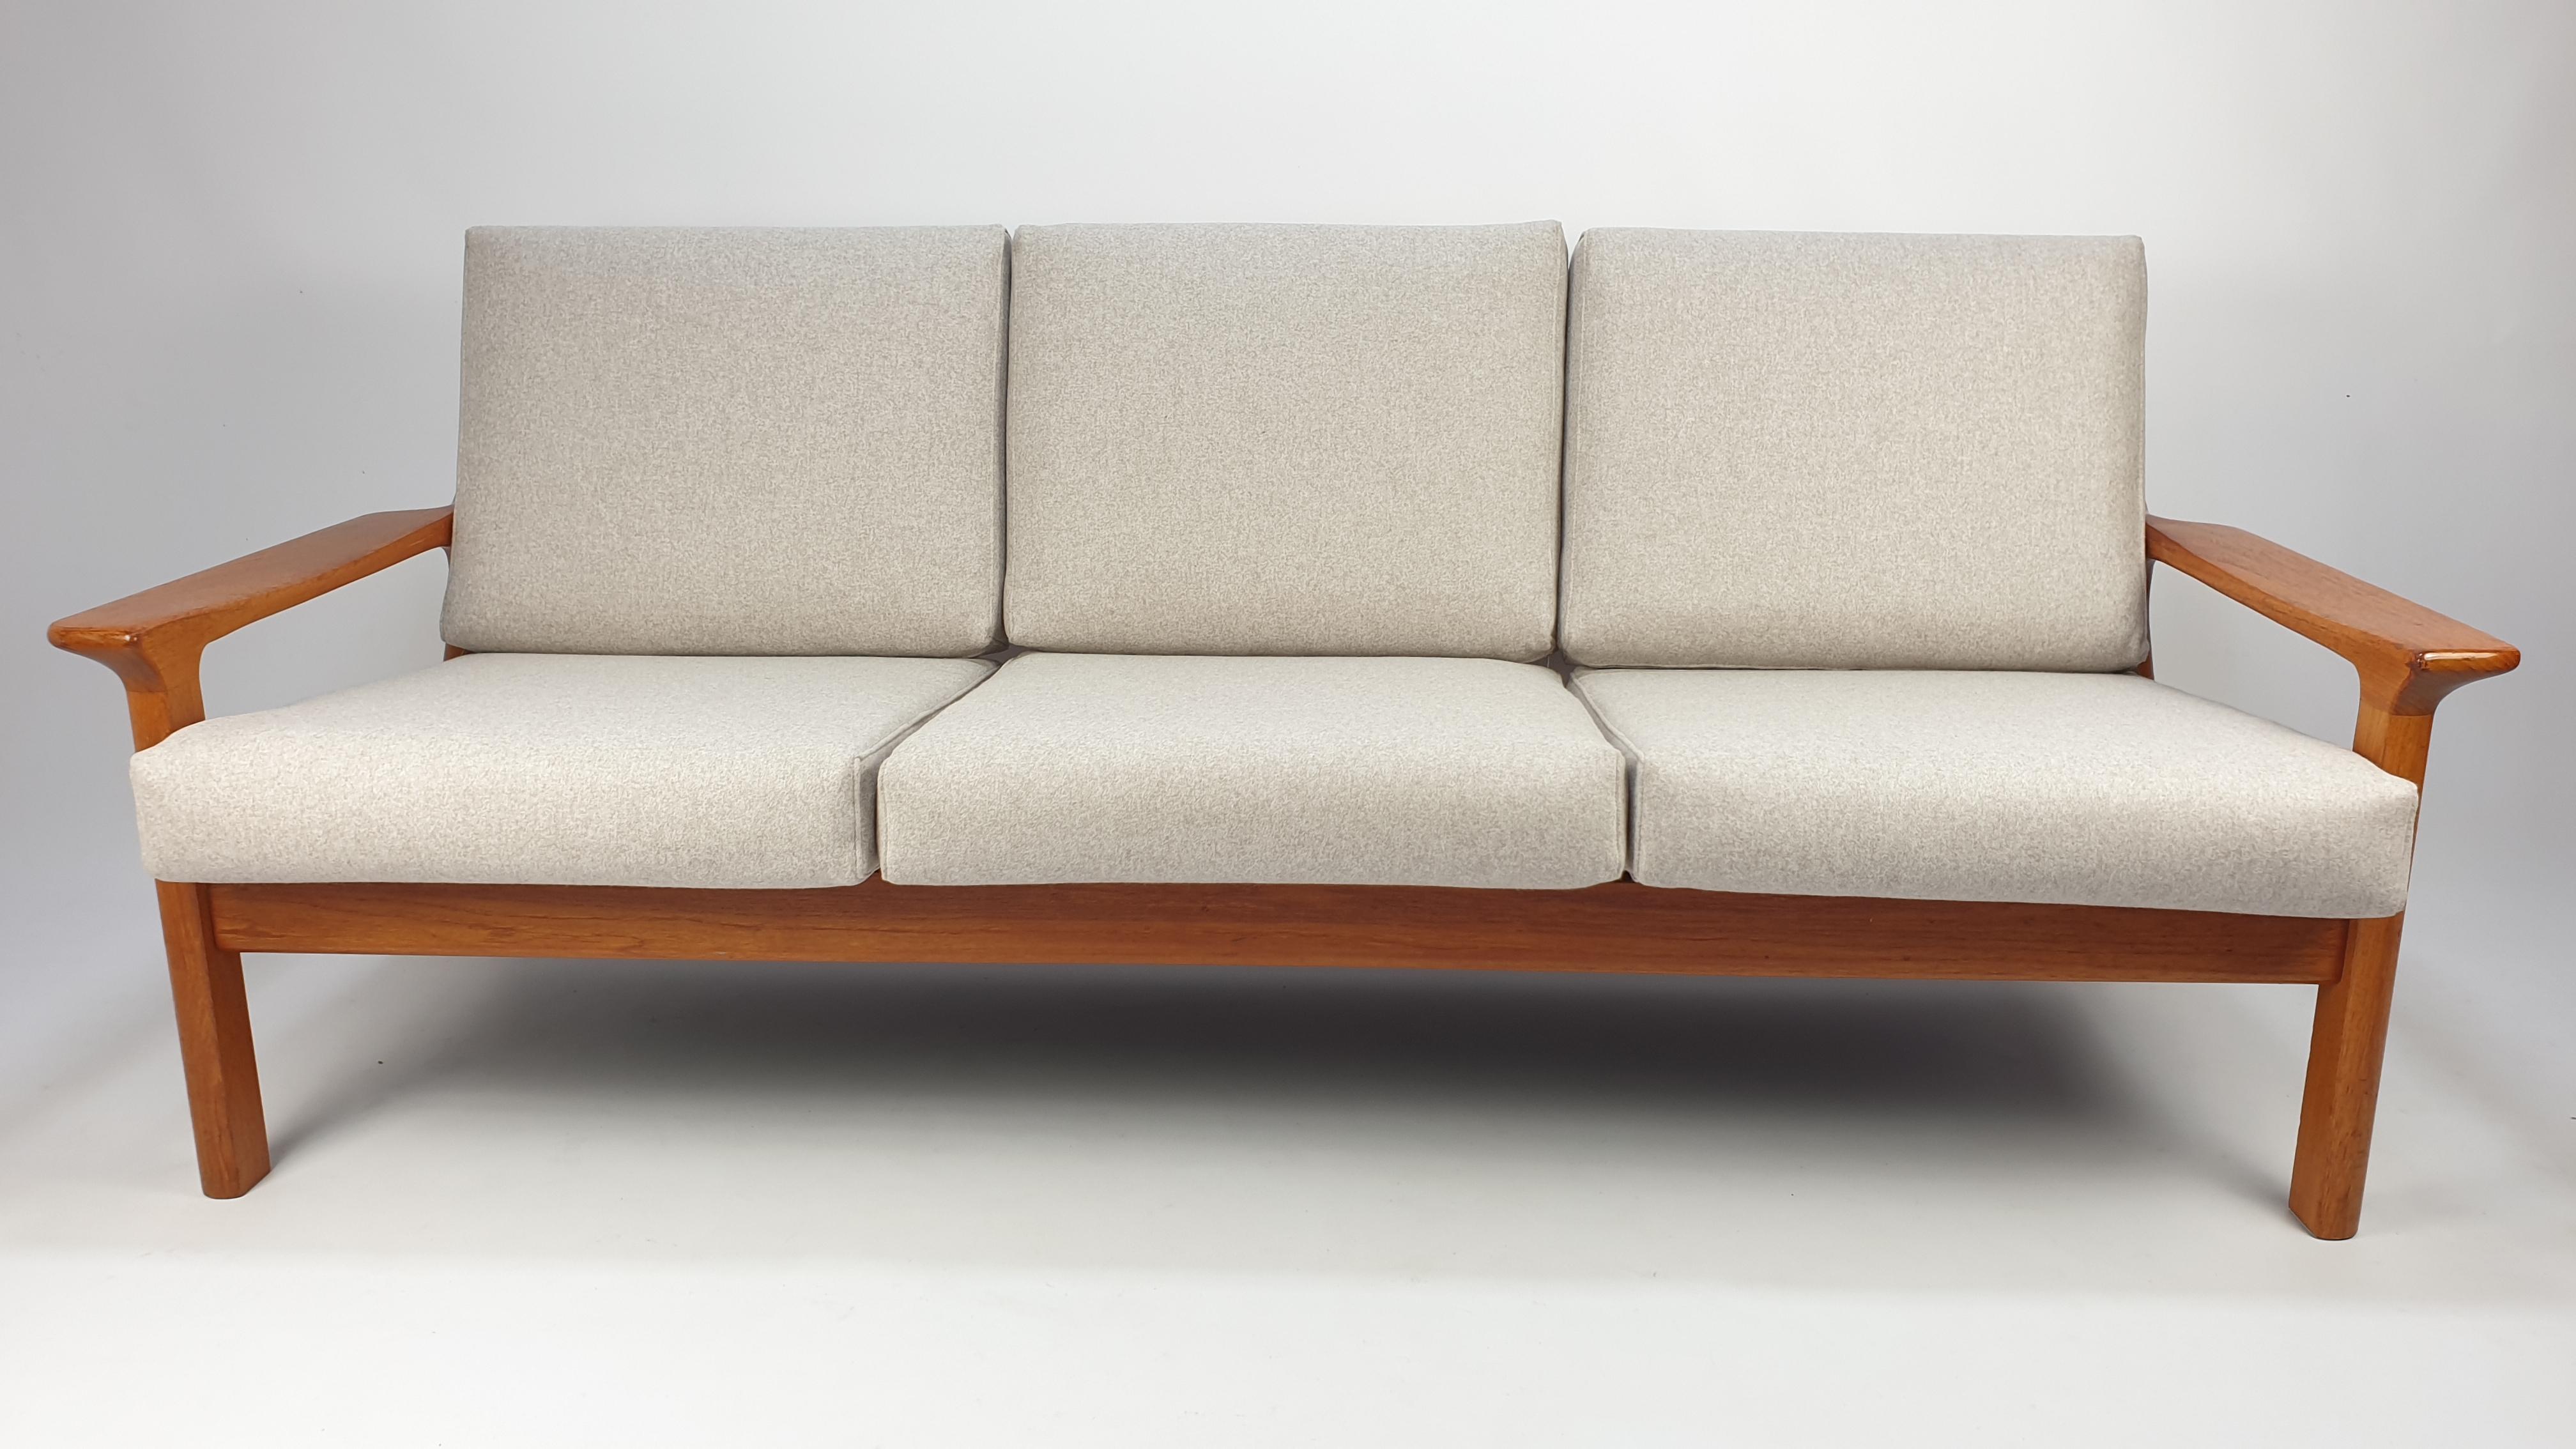 Elegant sofa designed by Juul Kristensen and manufactured in Denmark by Glostrup Møbelfabrik circa 1970s. 

A teak wood frame and sculpted armrests with organic shapes showing exceptional craftsmanship throughout the design. 

The seat and back